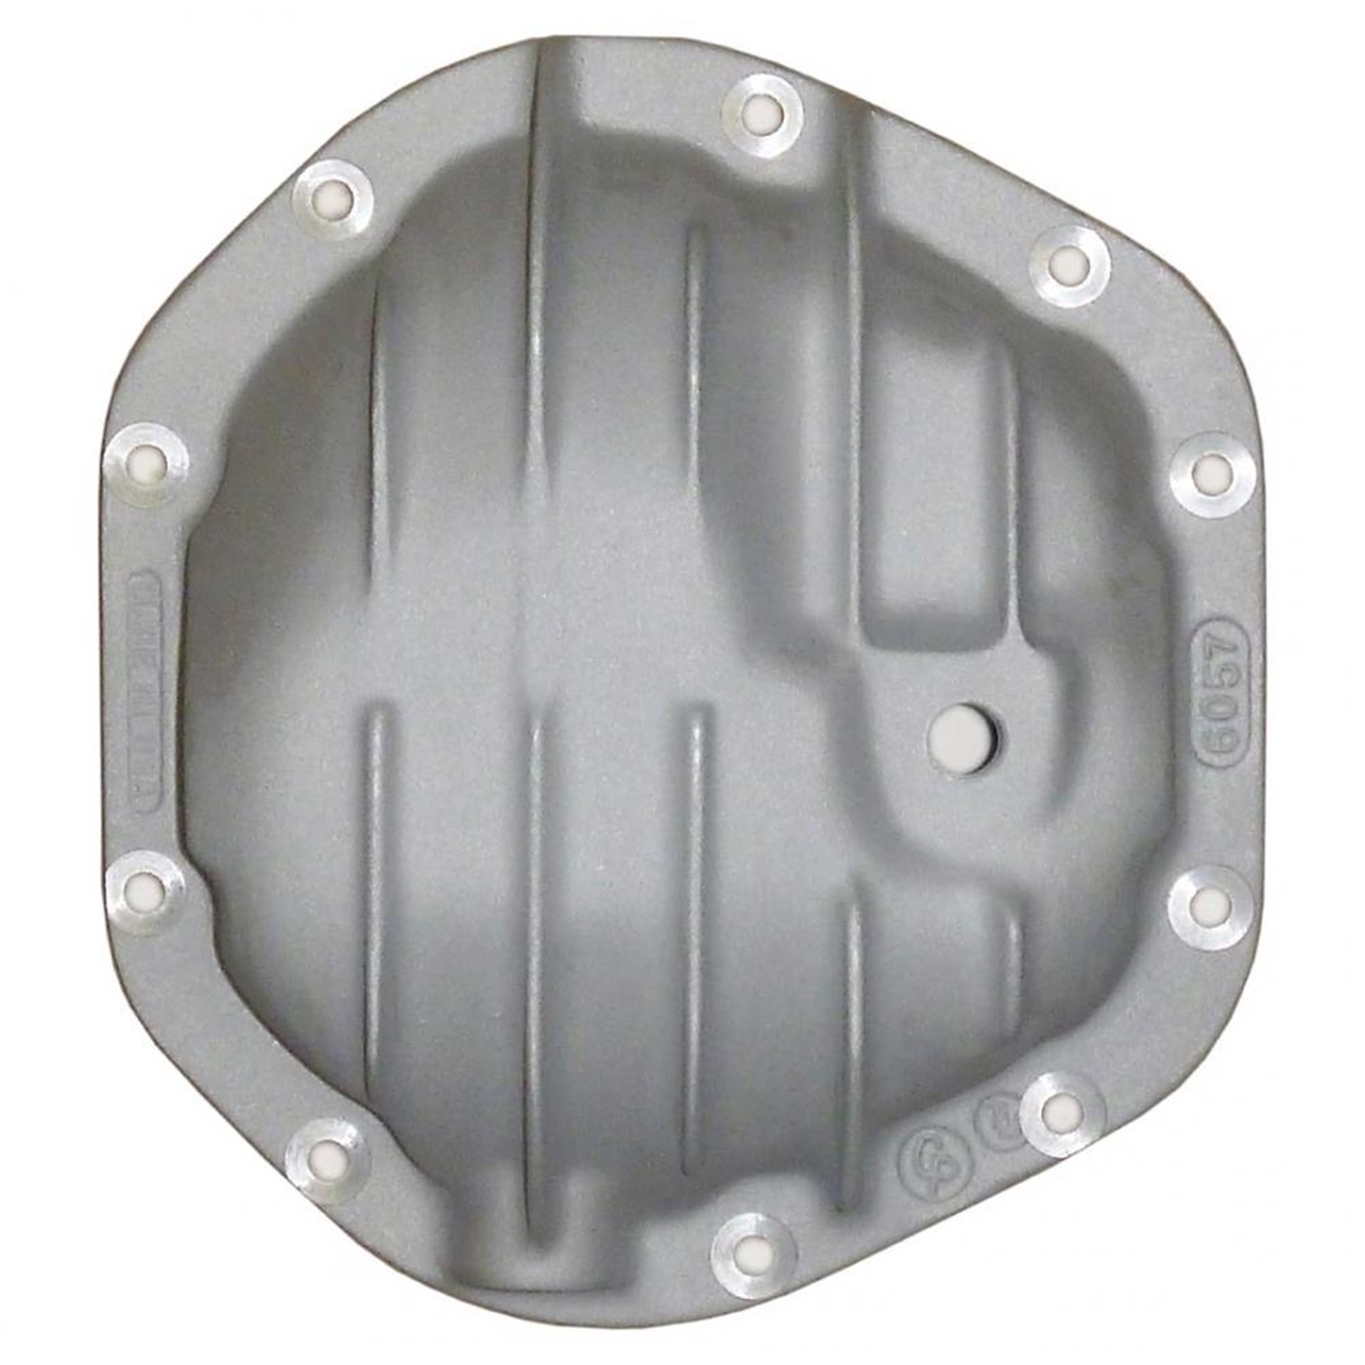 Dana 44, 10 Bolt, High Front Fill  Differential Cover